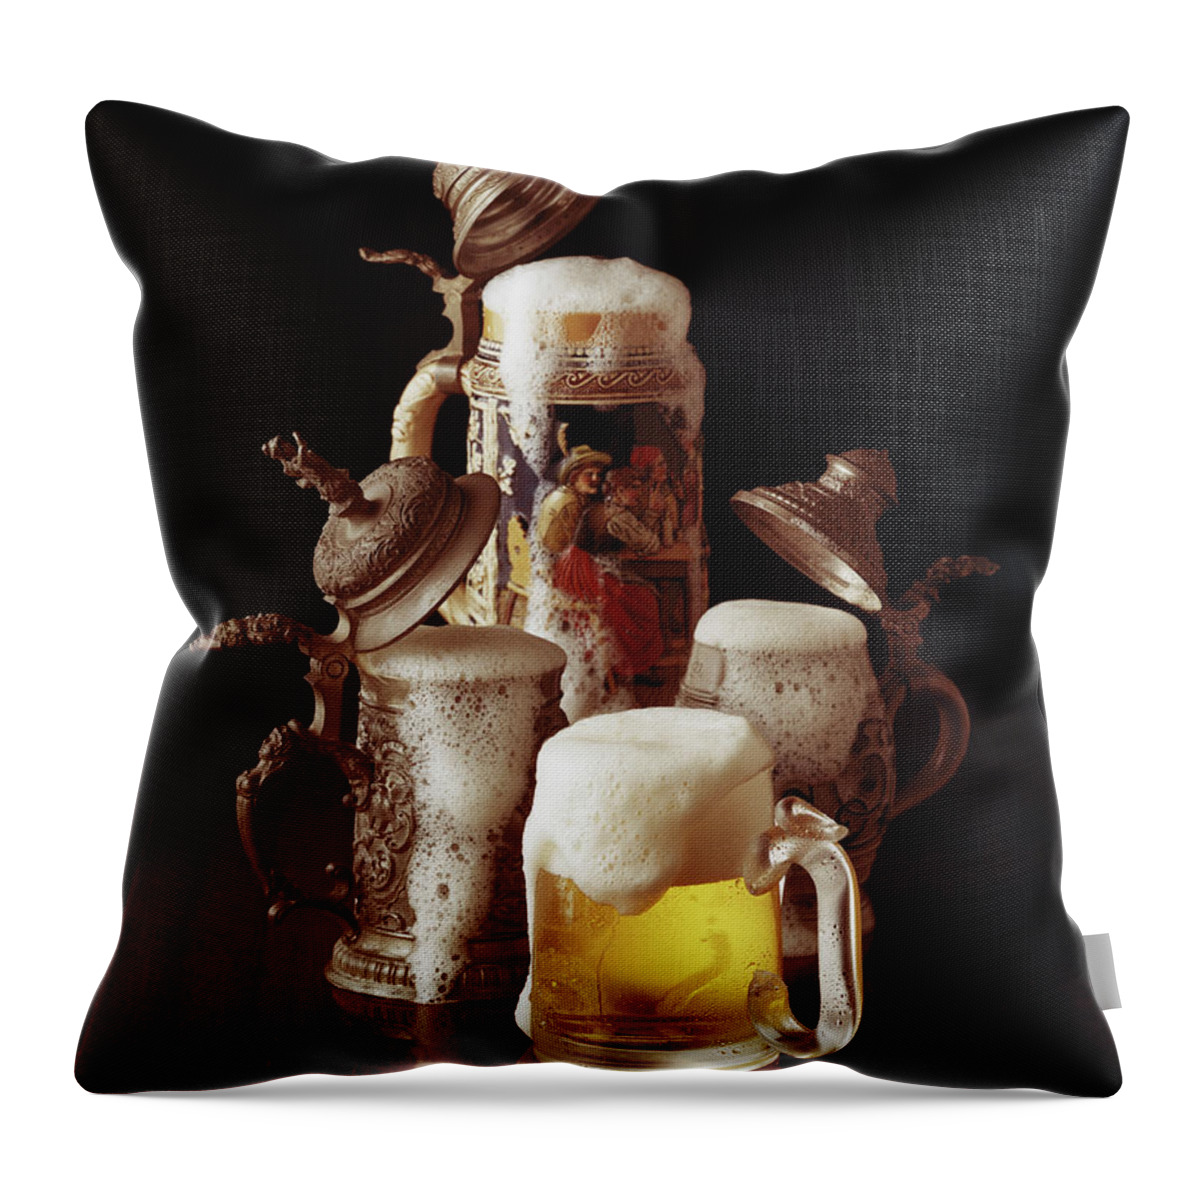 1984 Throw Pillow featuring the photograph Traditional Beer Stein And Beer Glass by Tom Kelley Archive